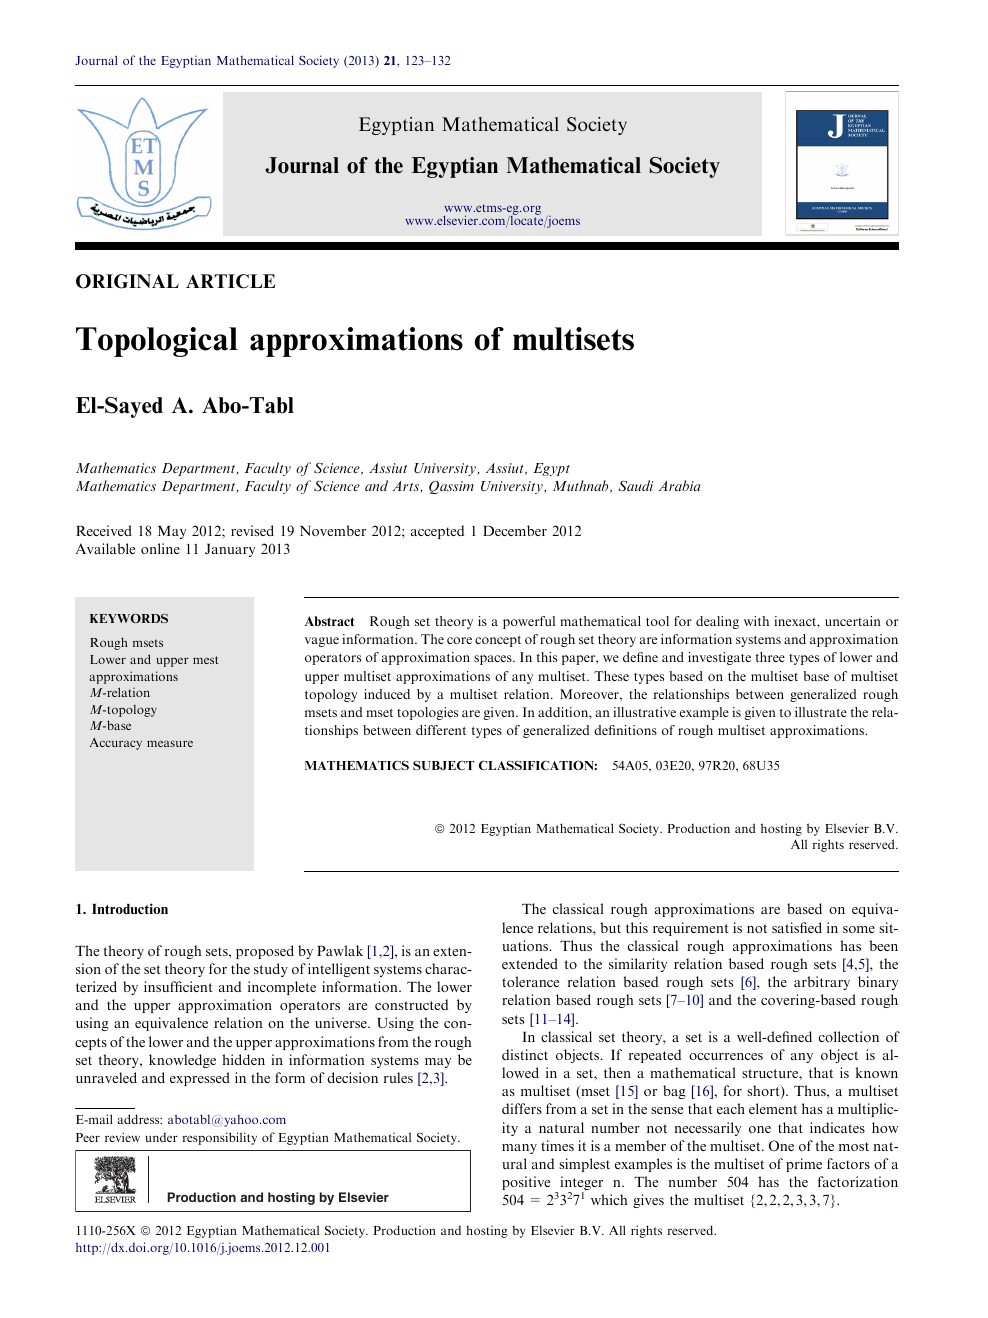 Topological Approximations Of Multisets Topic Of Research Paper In Computer And Information Sciences Download Scholarly Article Pdf And Read For Free On Cyberleninka Open Science Hub